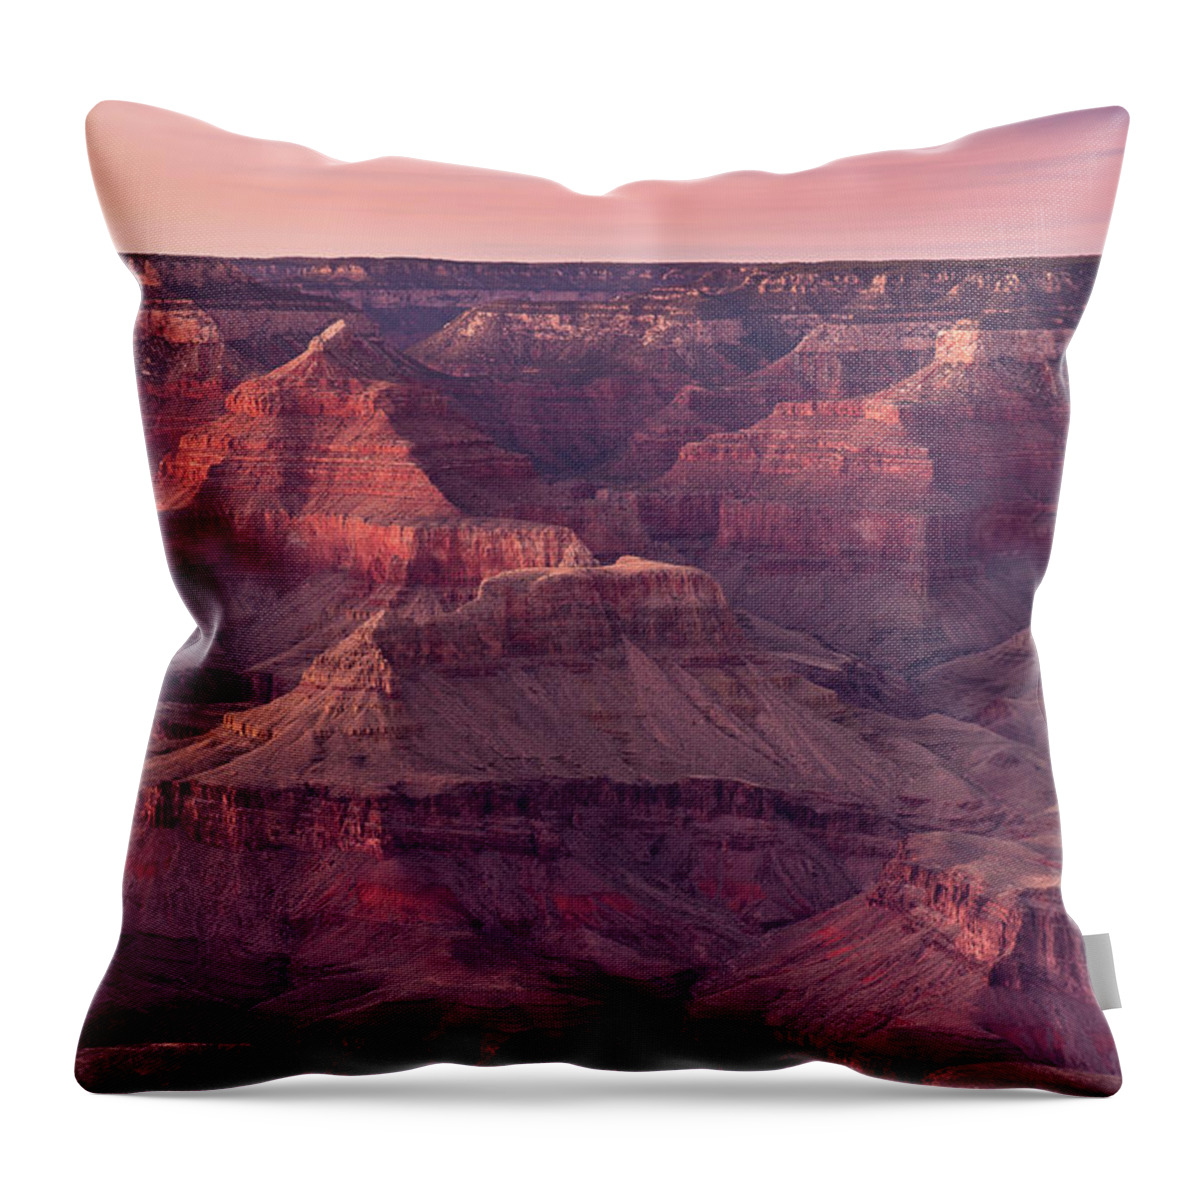 Grand Canyon National Park Throw Pillow featuring the photograph Grand Canyon Dusk 2 by Greg Nyquist